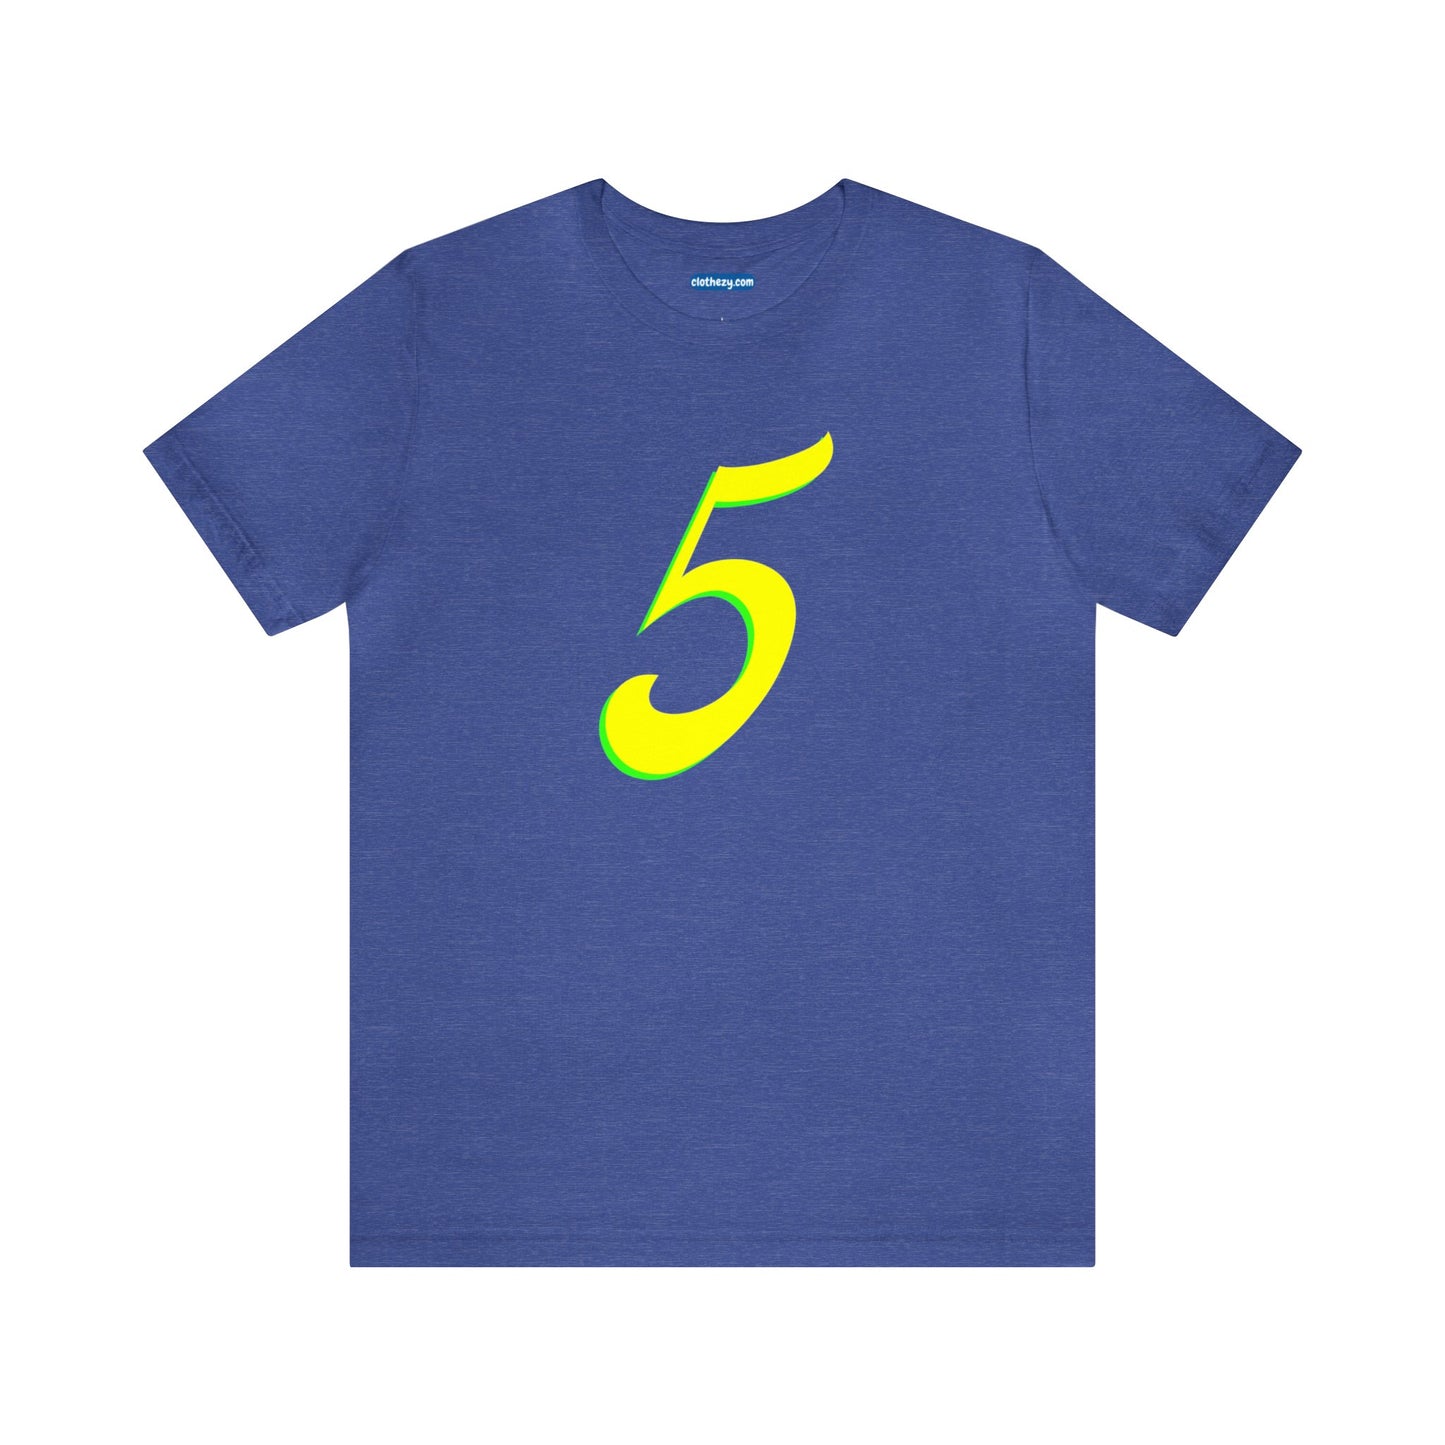 Number 5 Design - Soft Cotton Tee for birthdays and celebrations, Gift for friends and family, Multiple Options by clothezy.com in Royal Blue Heather Size Small - Buy Now